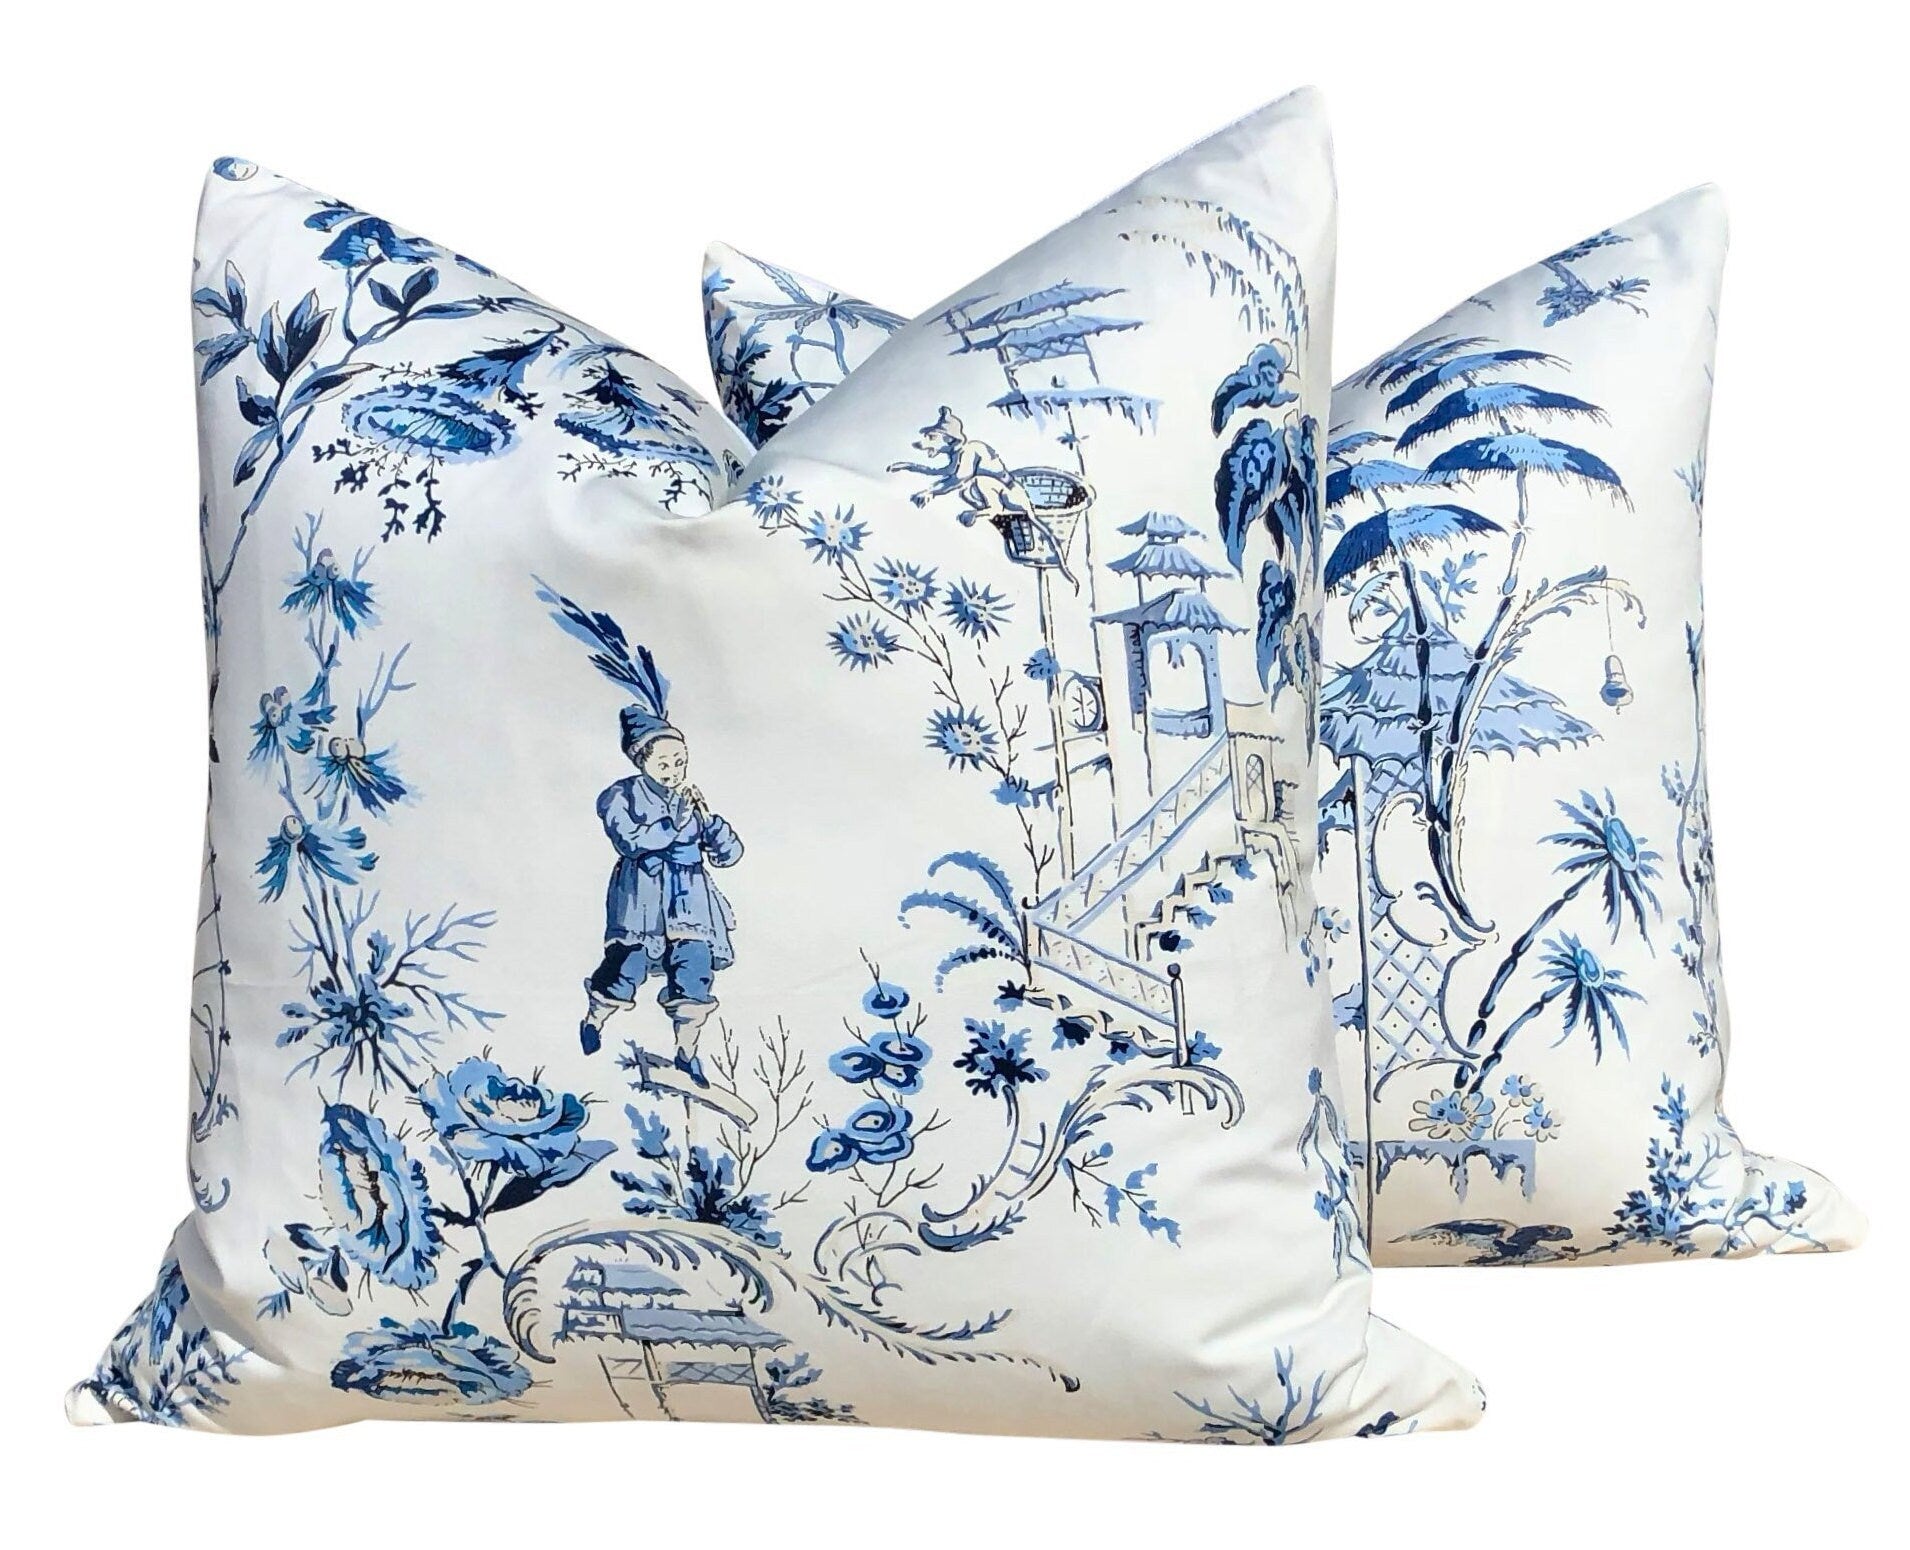 Nanjing Pillow in Porcelain. Chinoiserie Pillow Cover, Toile Blue Lumbar Pillow Case, Accent Asian Decor, Floral Blue and White Cushion